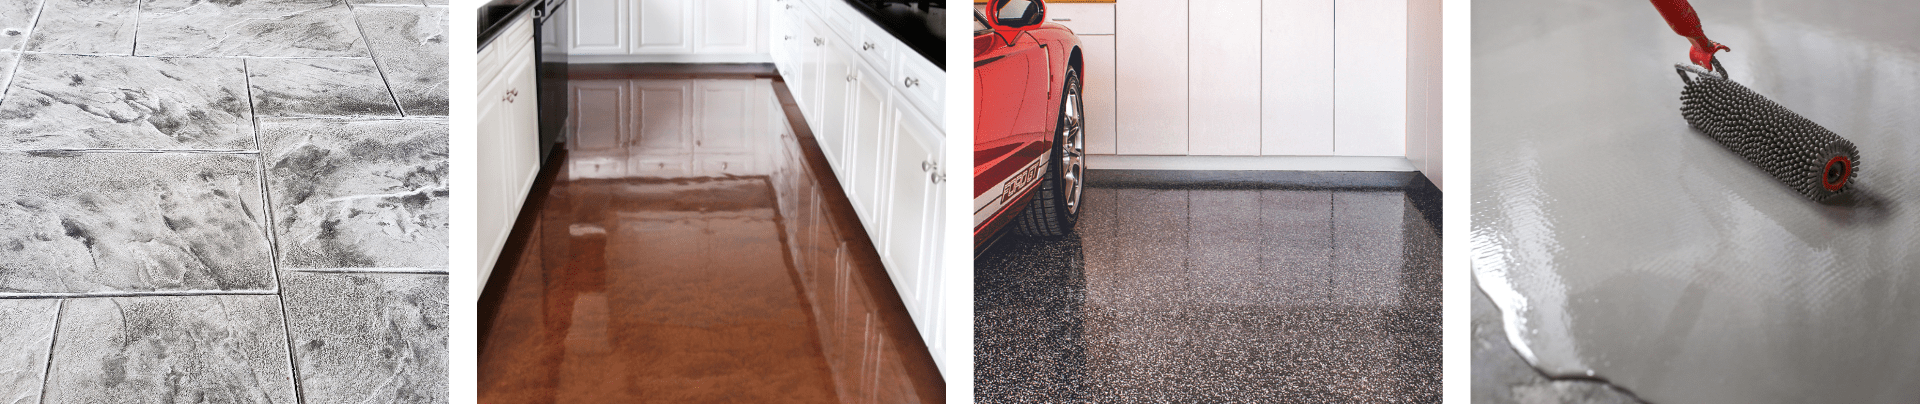 Upgrade your floors with commercial-grade concrete and epoxy materials suitable for industrial and residential use.